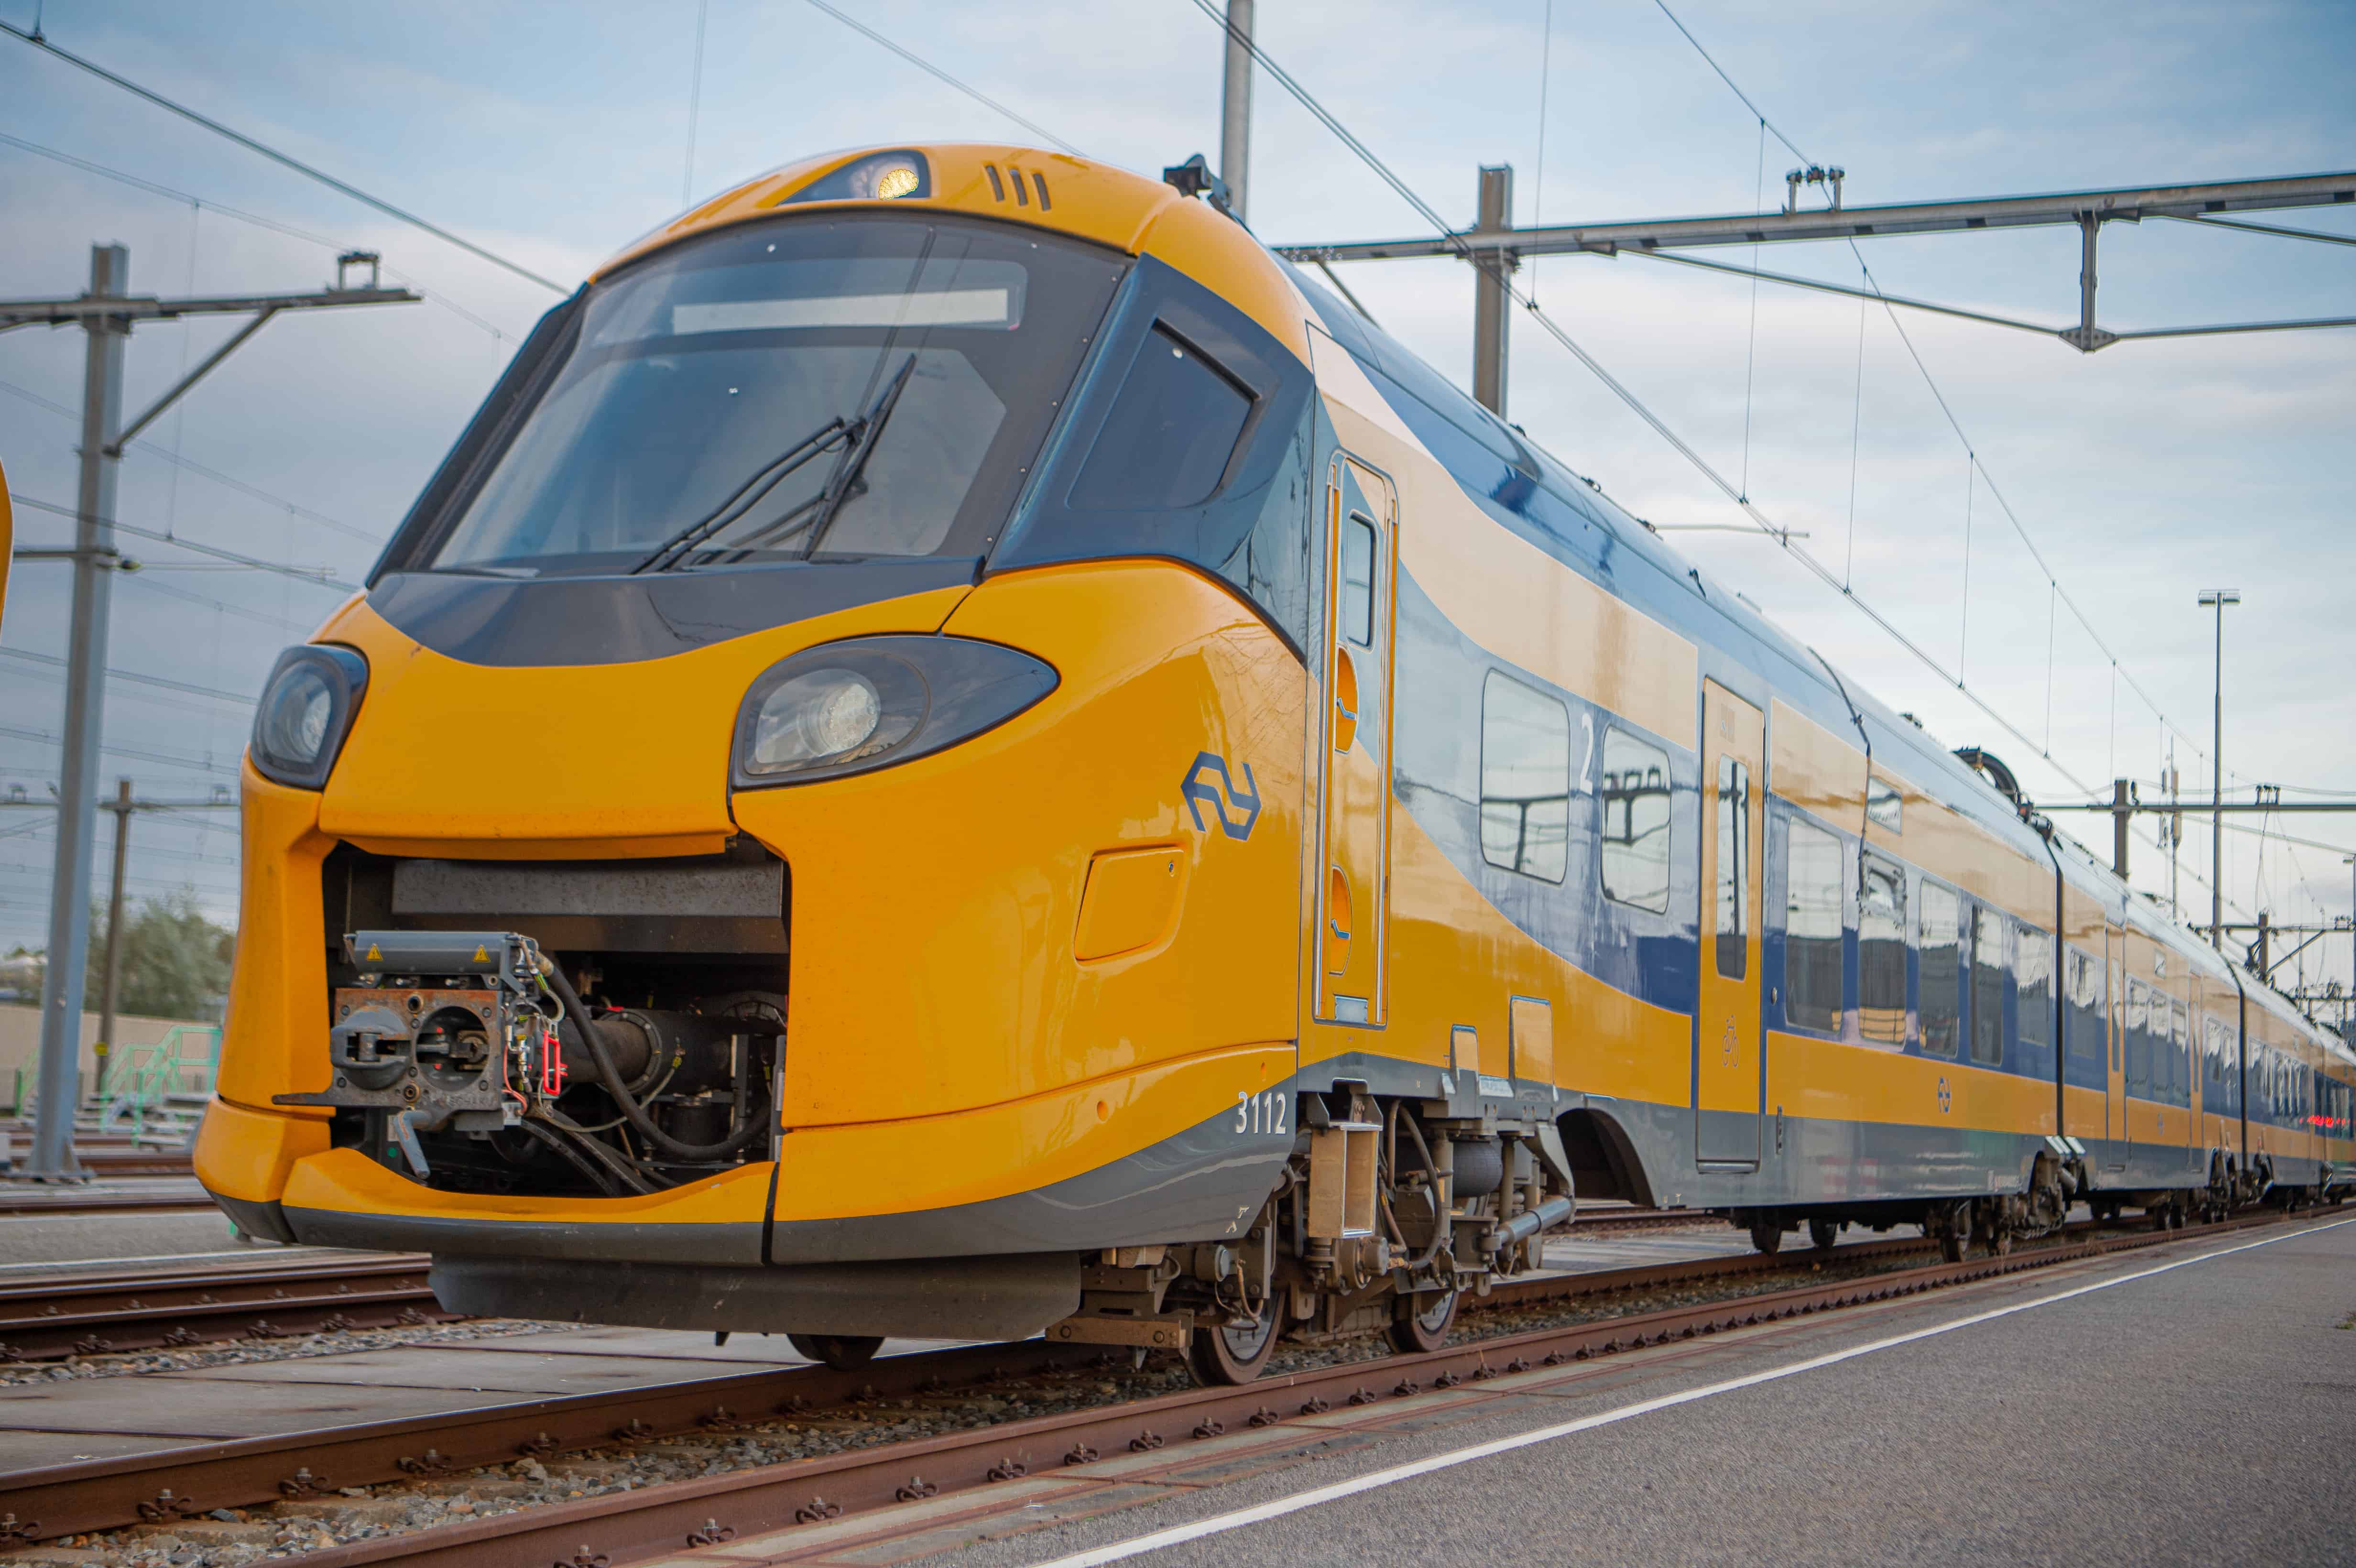 Delayed trains, but also innovation: 3 statements about the Dutch railways